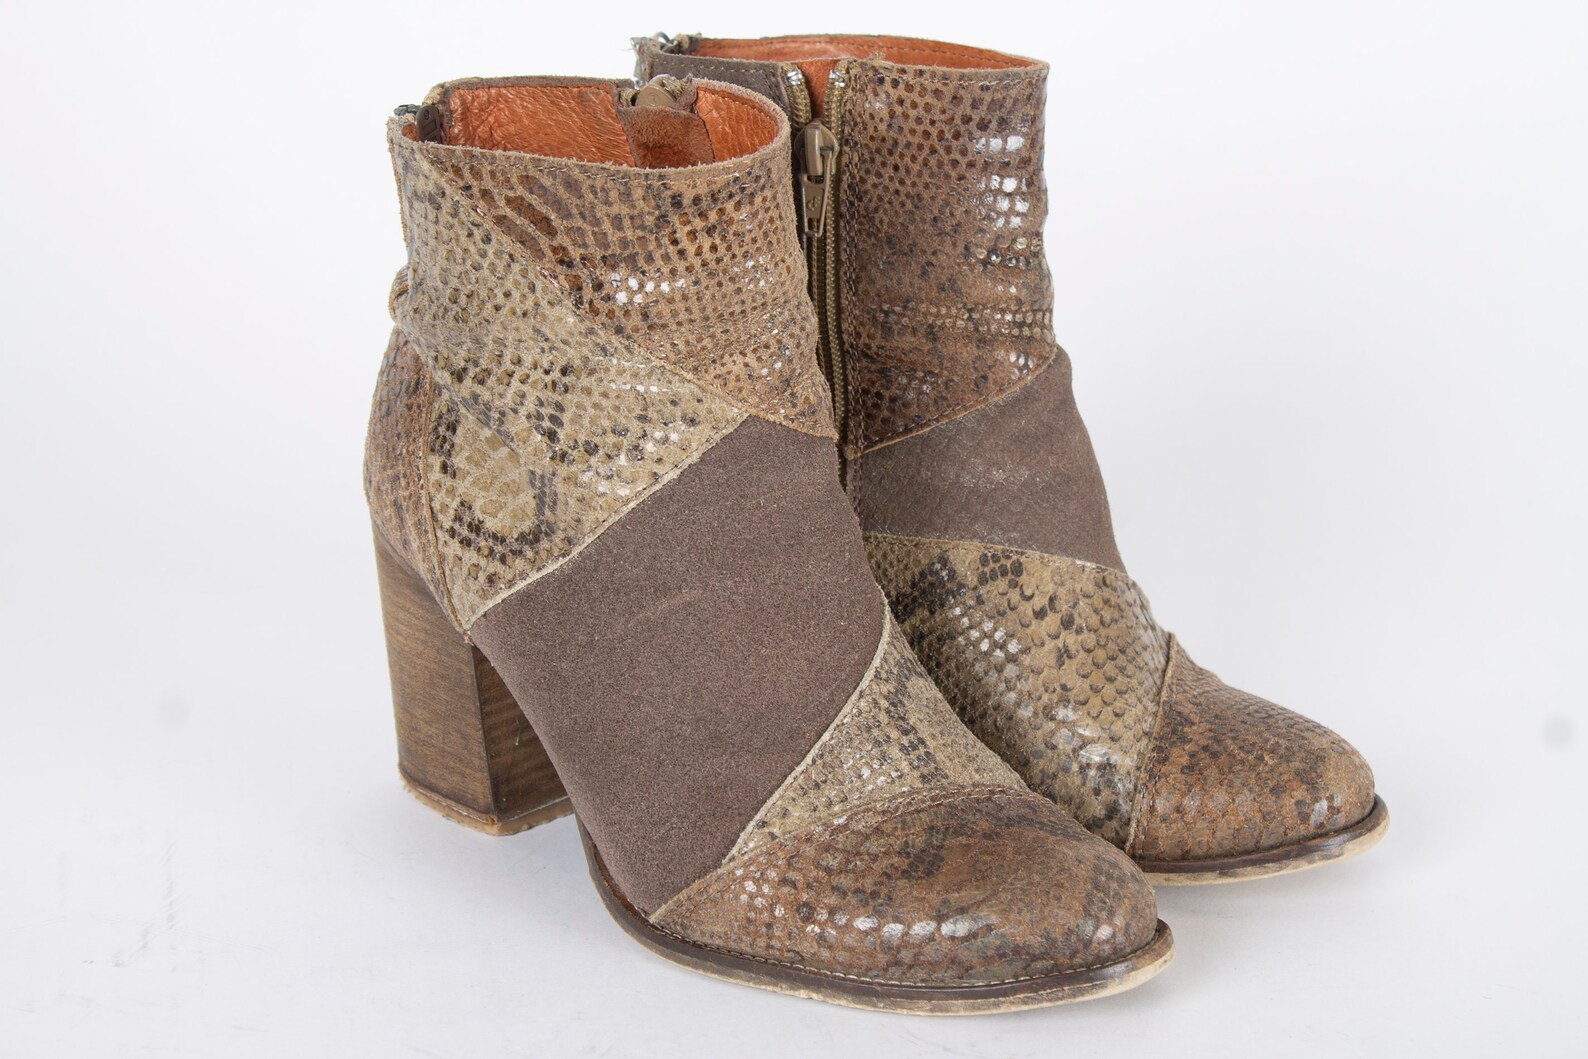 US7.5 Vintage Ankle Boots Snakeskin Brown Classy Booties - Etsy